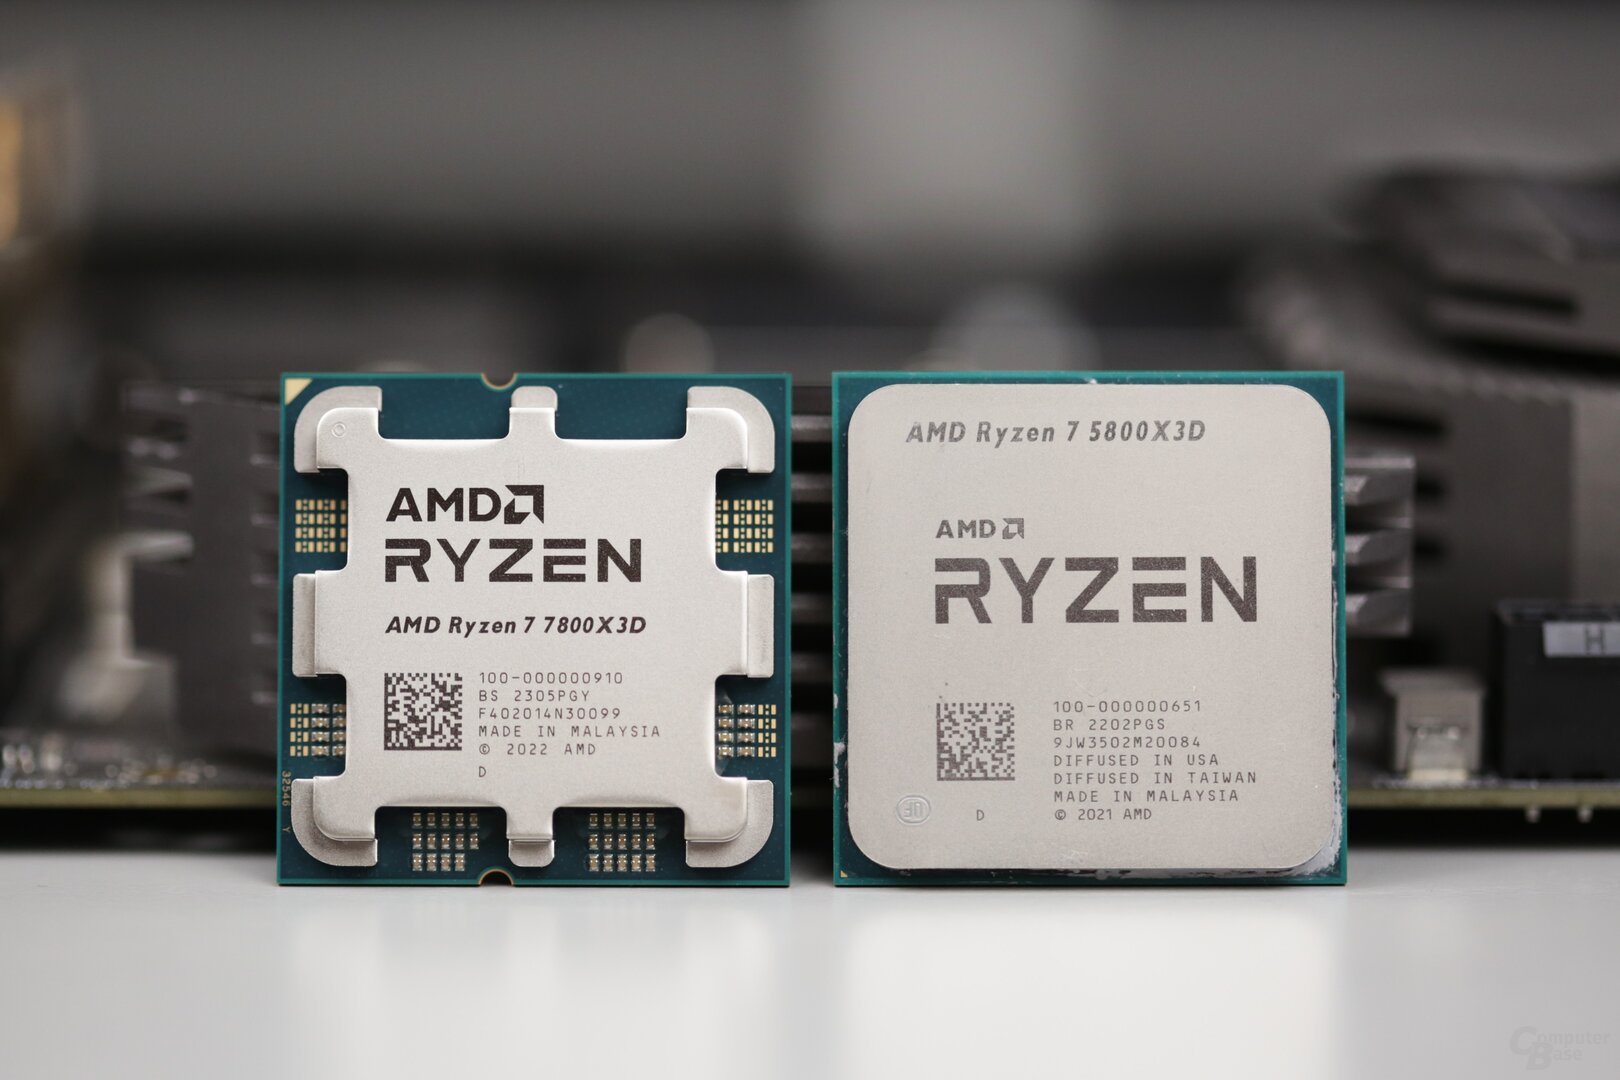 AMD 6-core Ryzen 5 7600X CPU drops to $199, cheaper than 7600 non-X and  comes with Starfield game code 